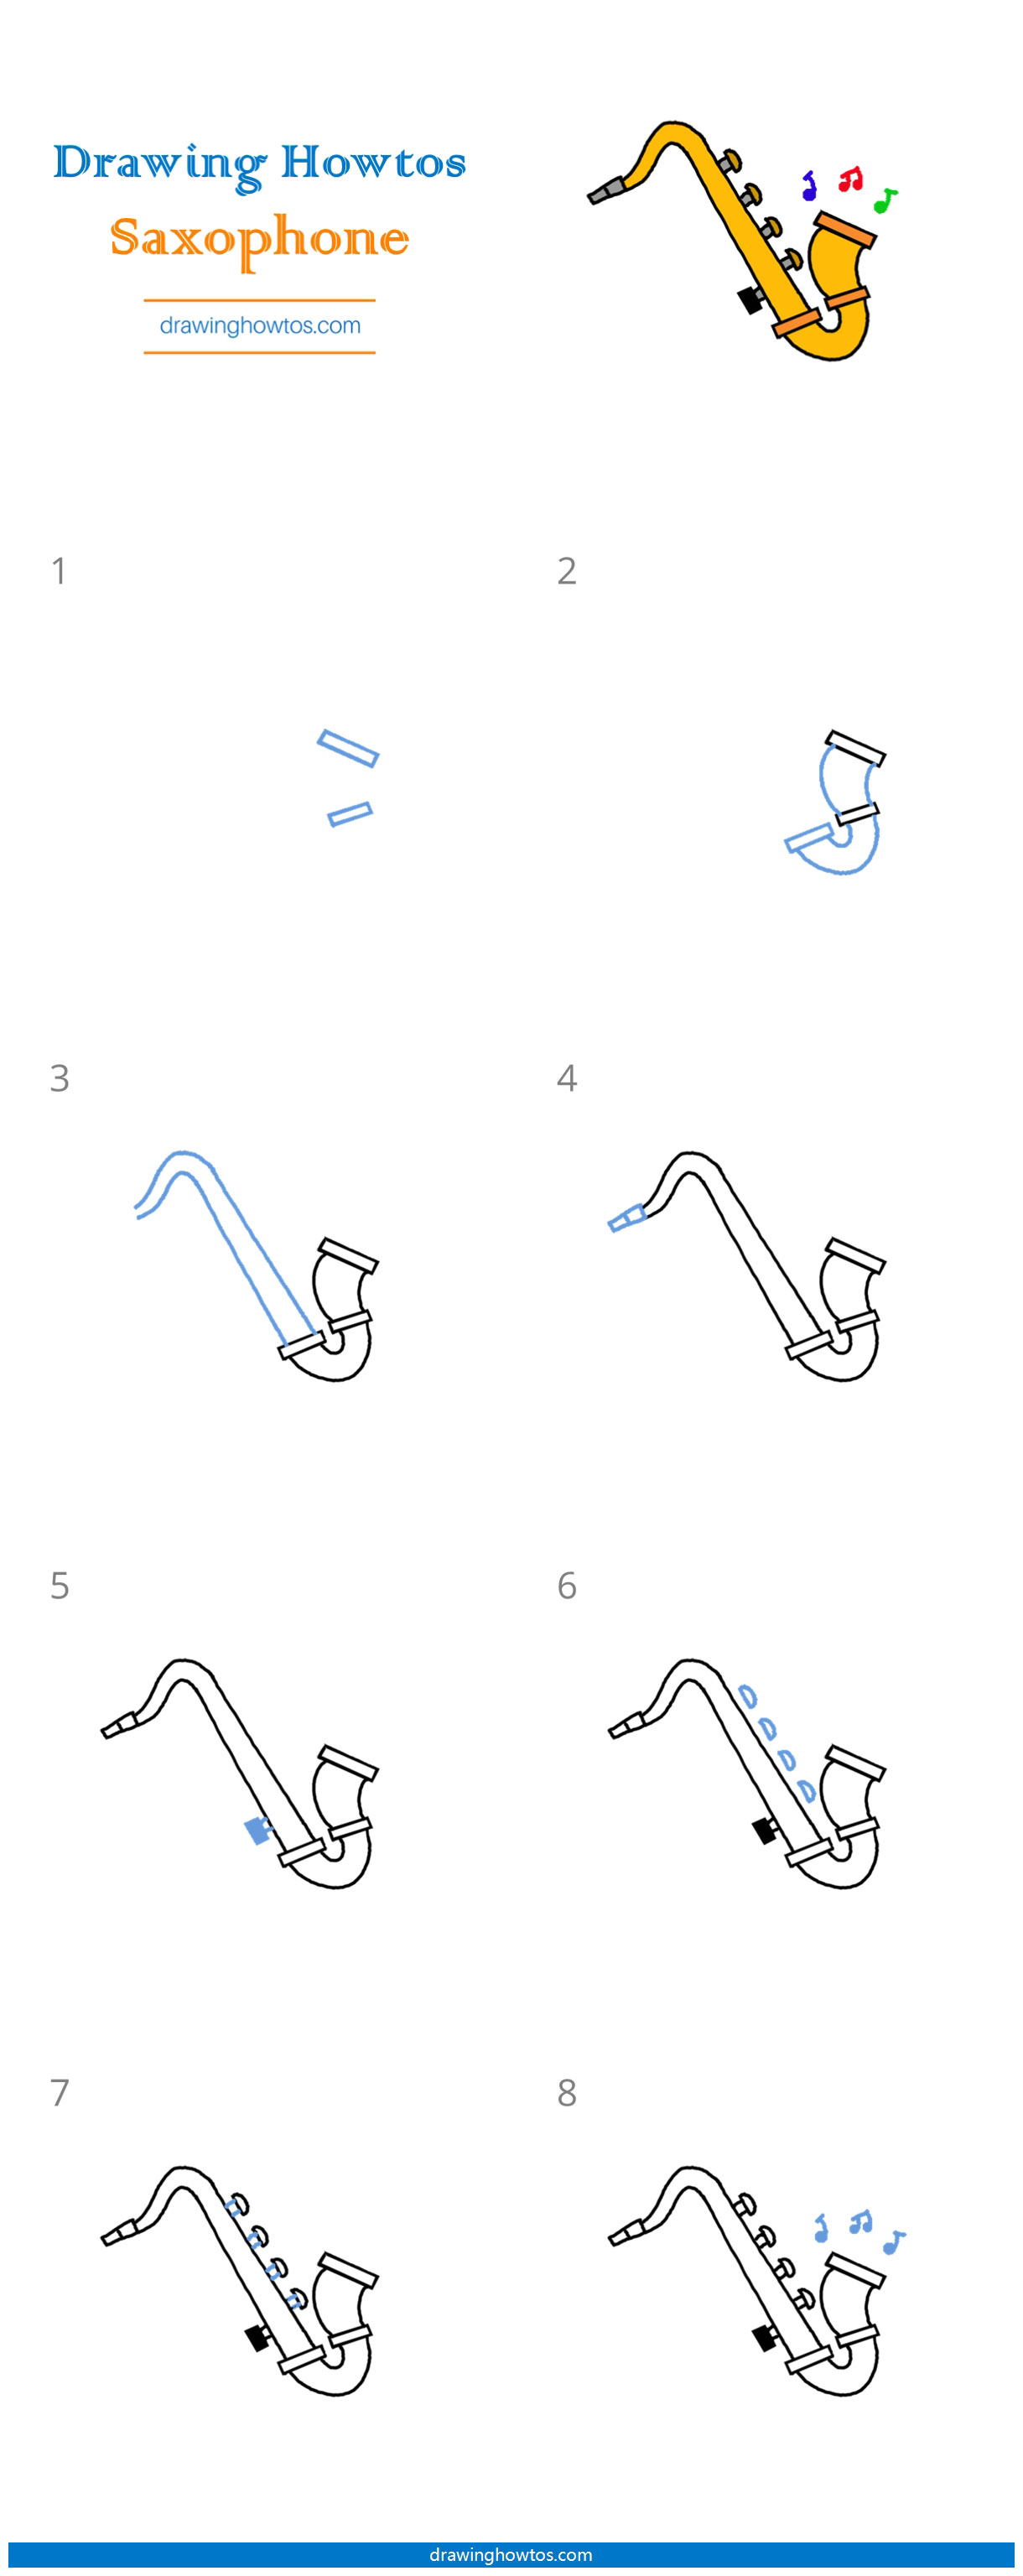 How to Draw a Saxophone Step by Step